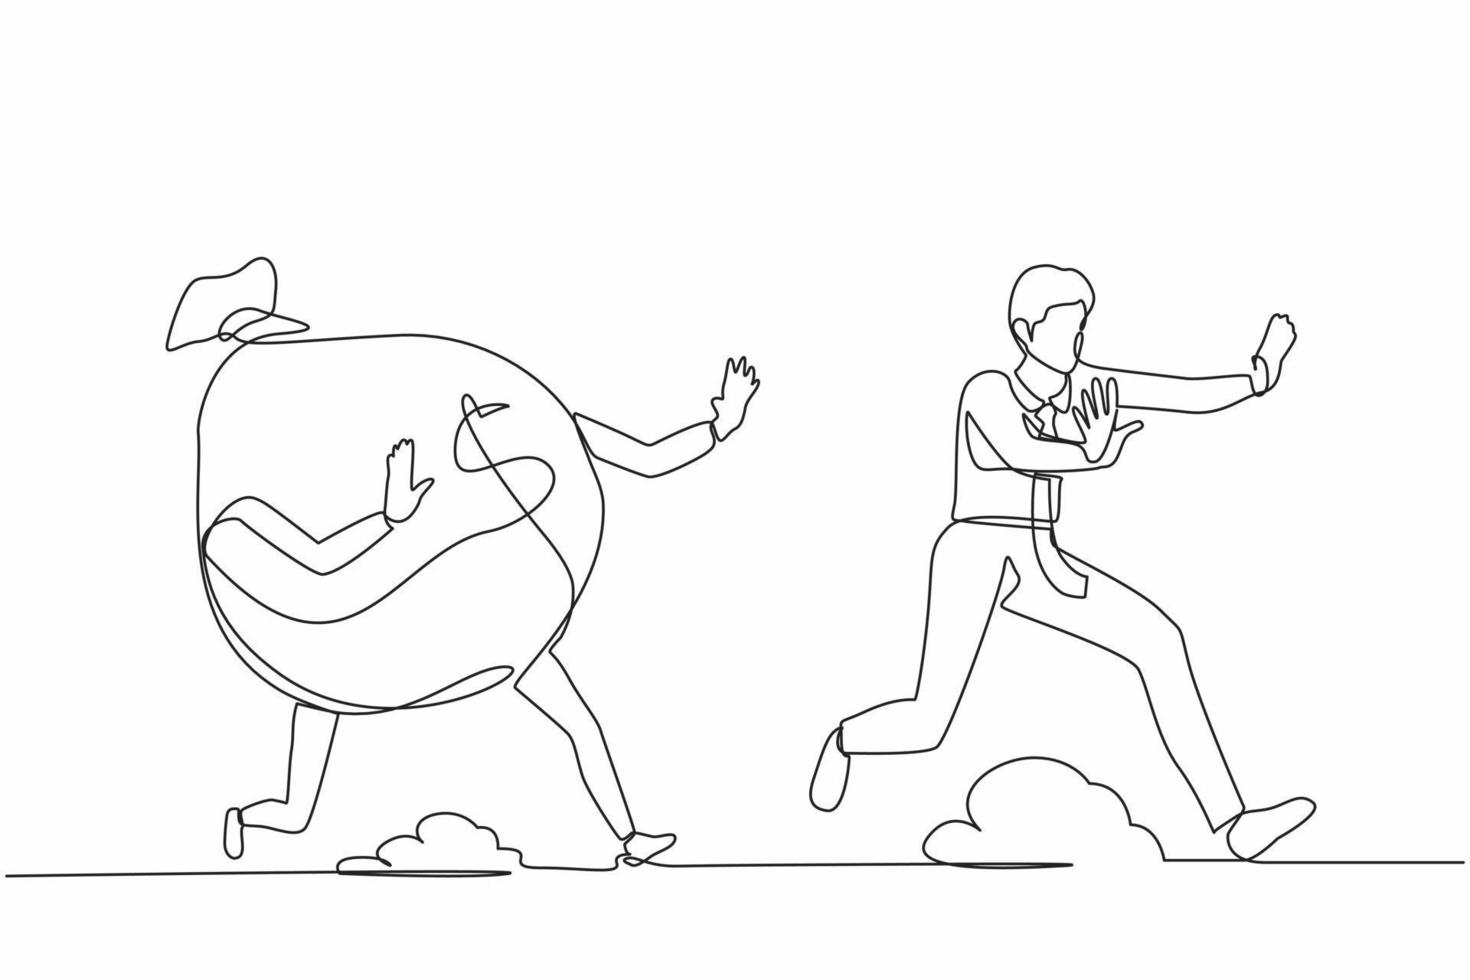 Continuous one line drawing stressed businessman being chased by money bag. Failed achieving goals and profit, exhausted for success, running out for money. Single line draw design vector illustration